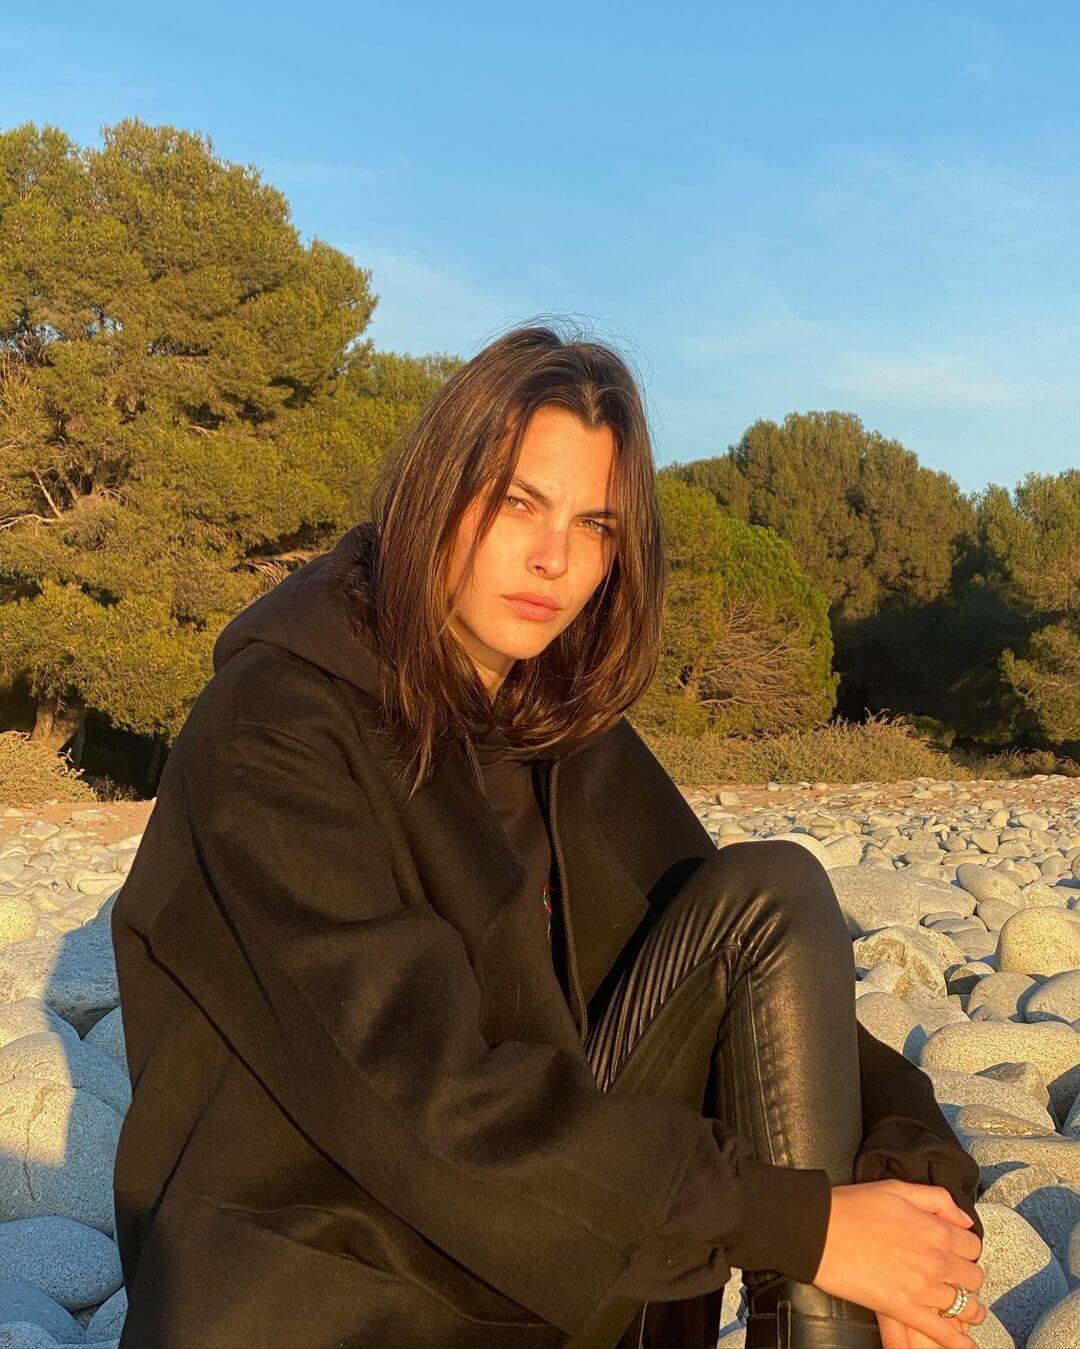 Fashion Inspiration To Take From Models Vittoria Ceretti - Hoodies And Sweatshirts